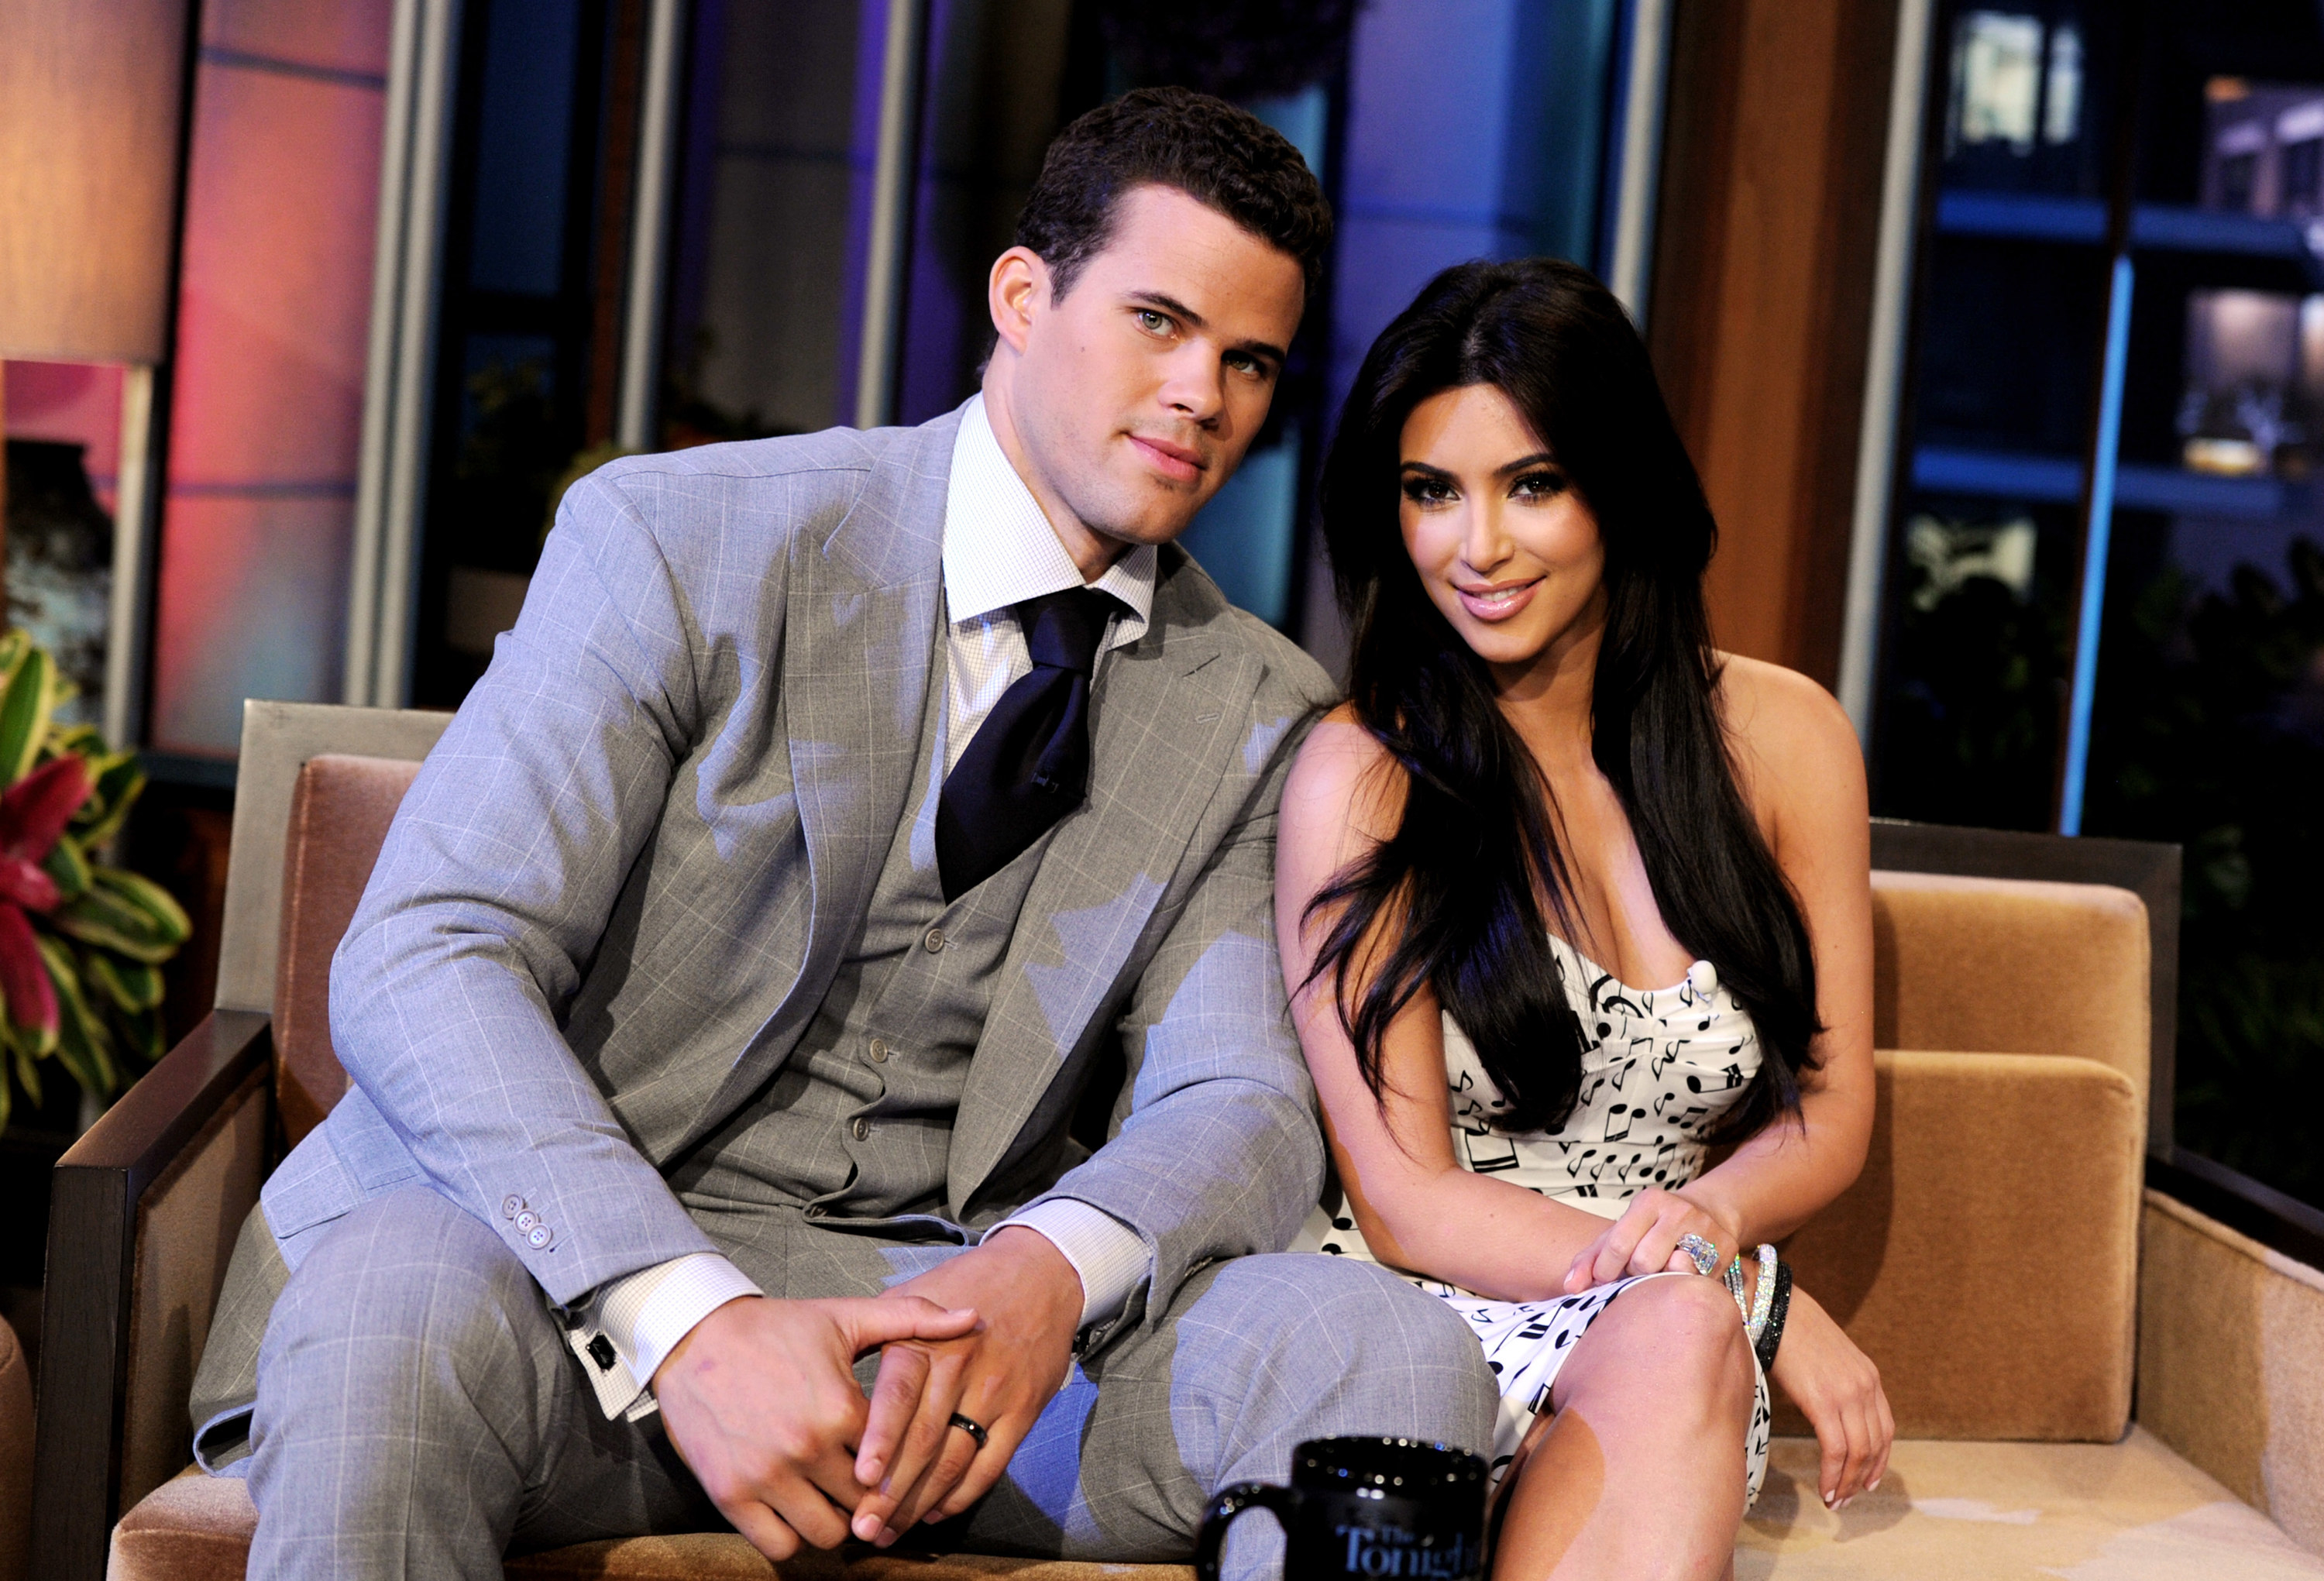 Kris Humphries and Kim Kardashian appear on The Tonight Show with Jay Leno in 2011